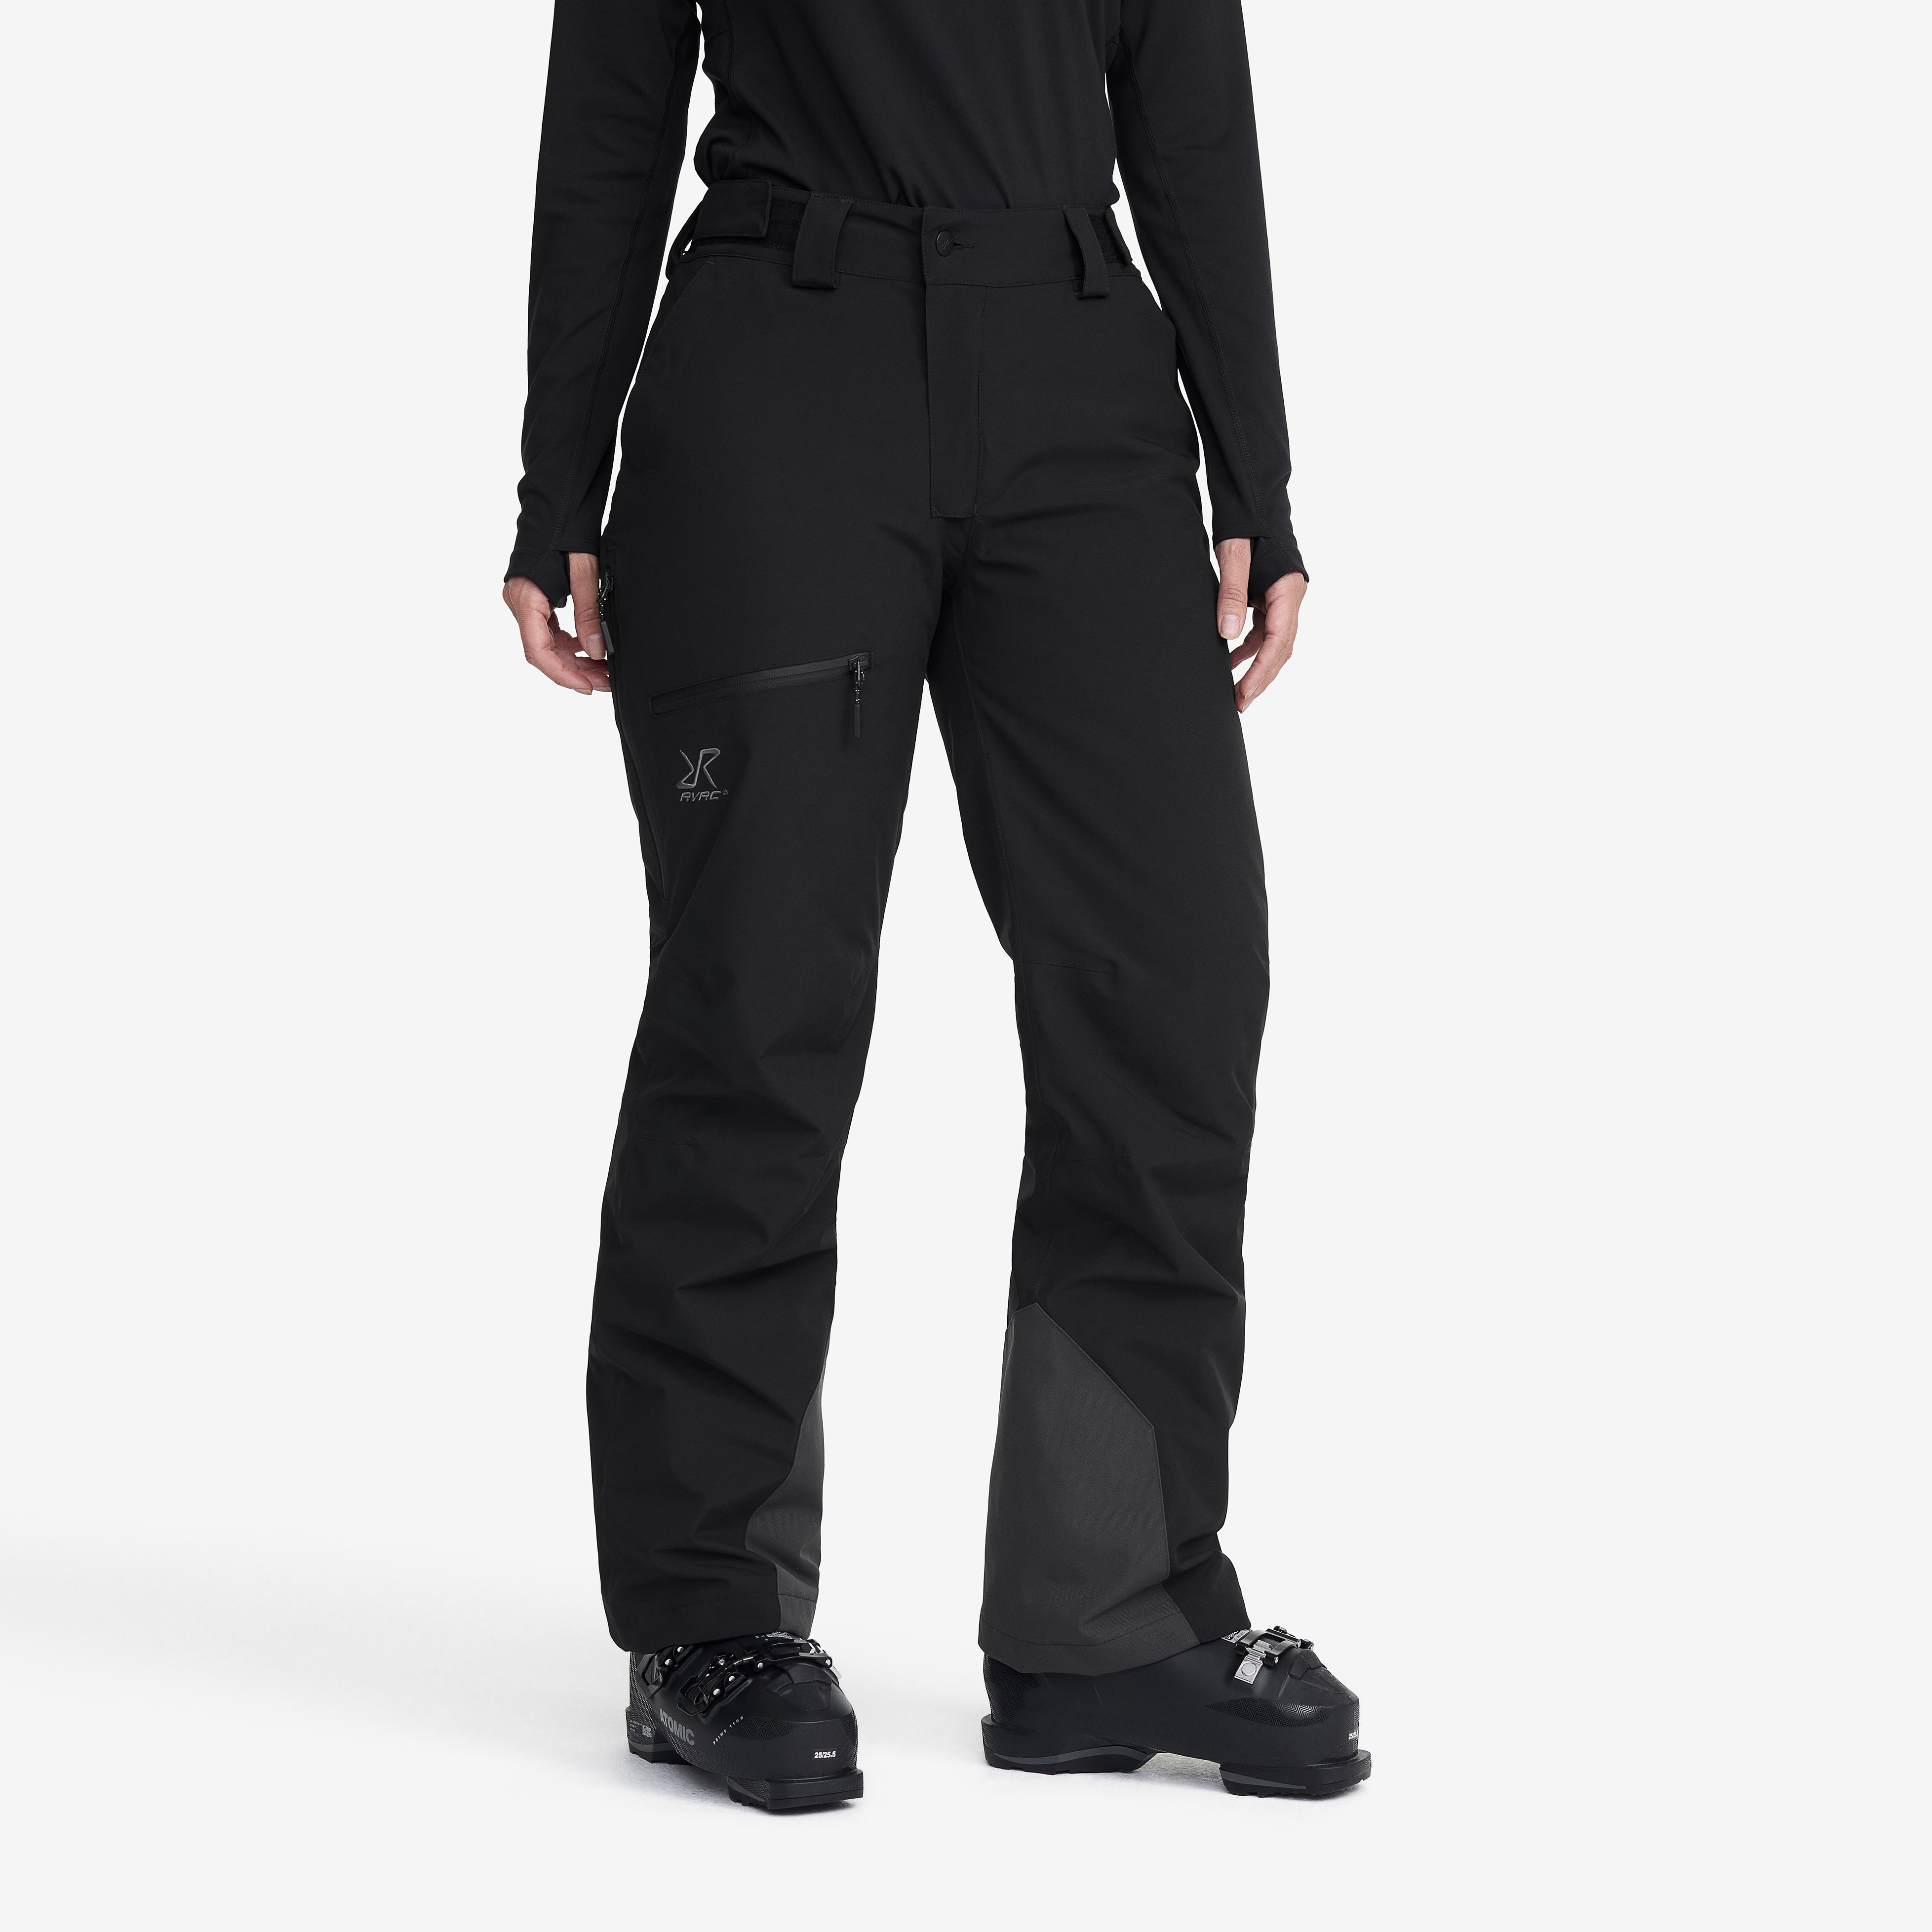 Halo 2L Insulated Snow Pants Black Mujeres